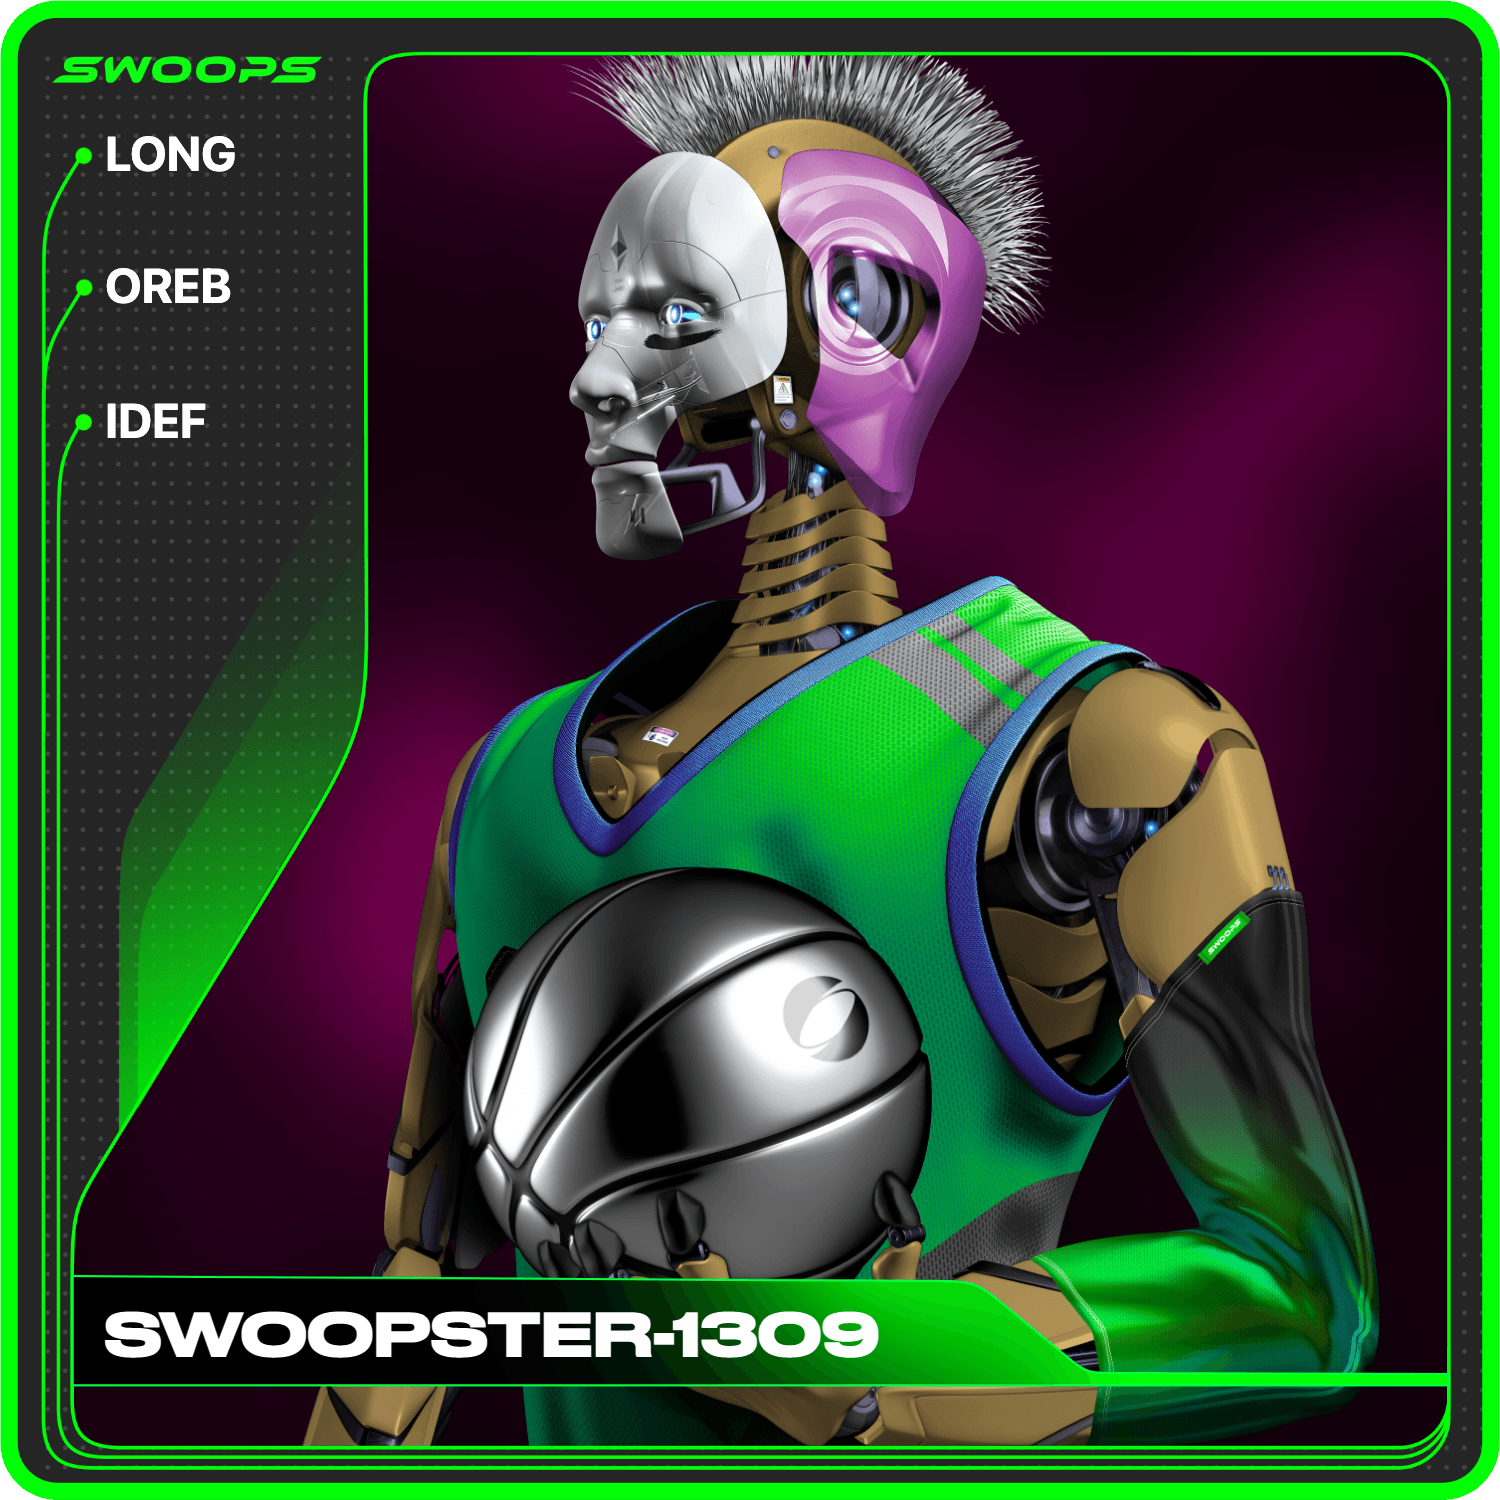 SWOOPSTER-1309